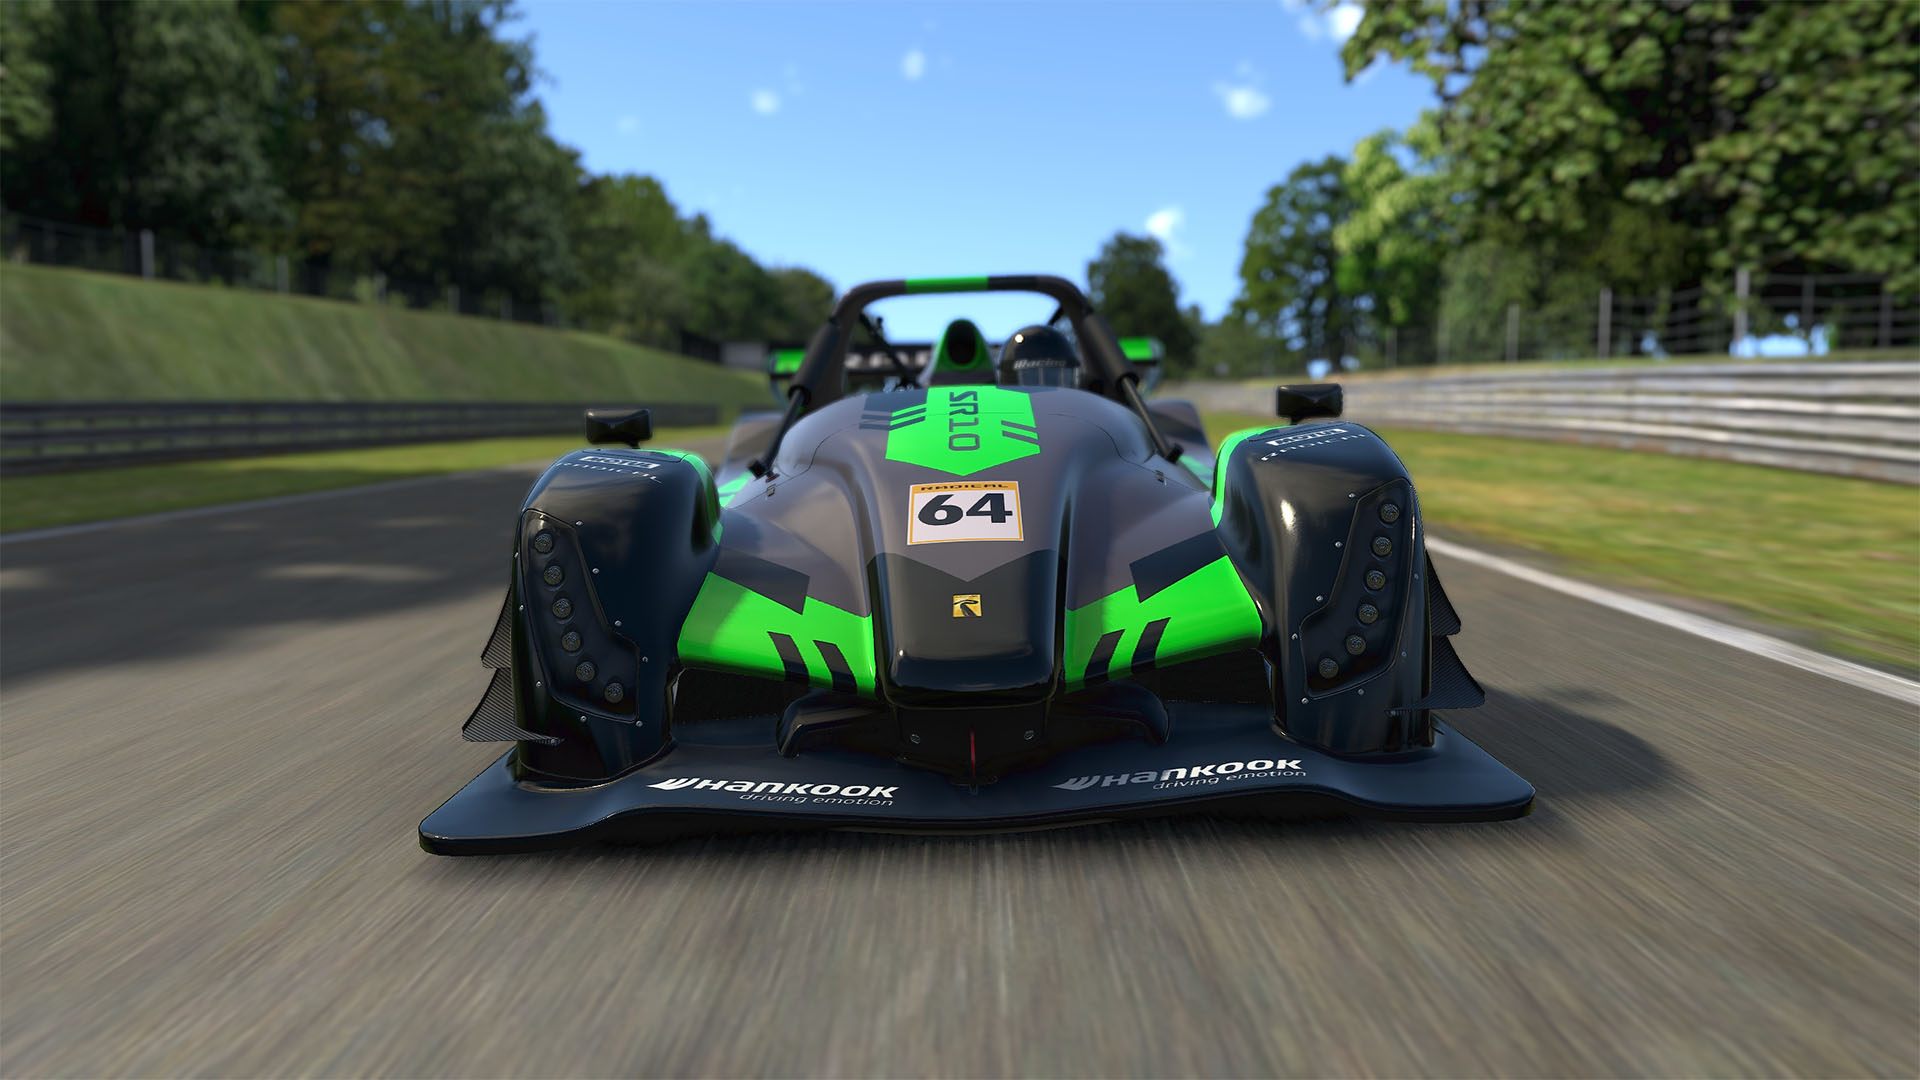 The Radical SR10 now available on iRacing